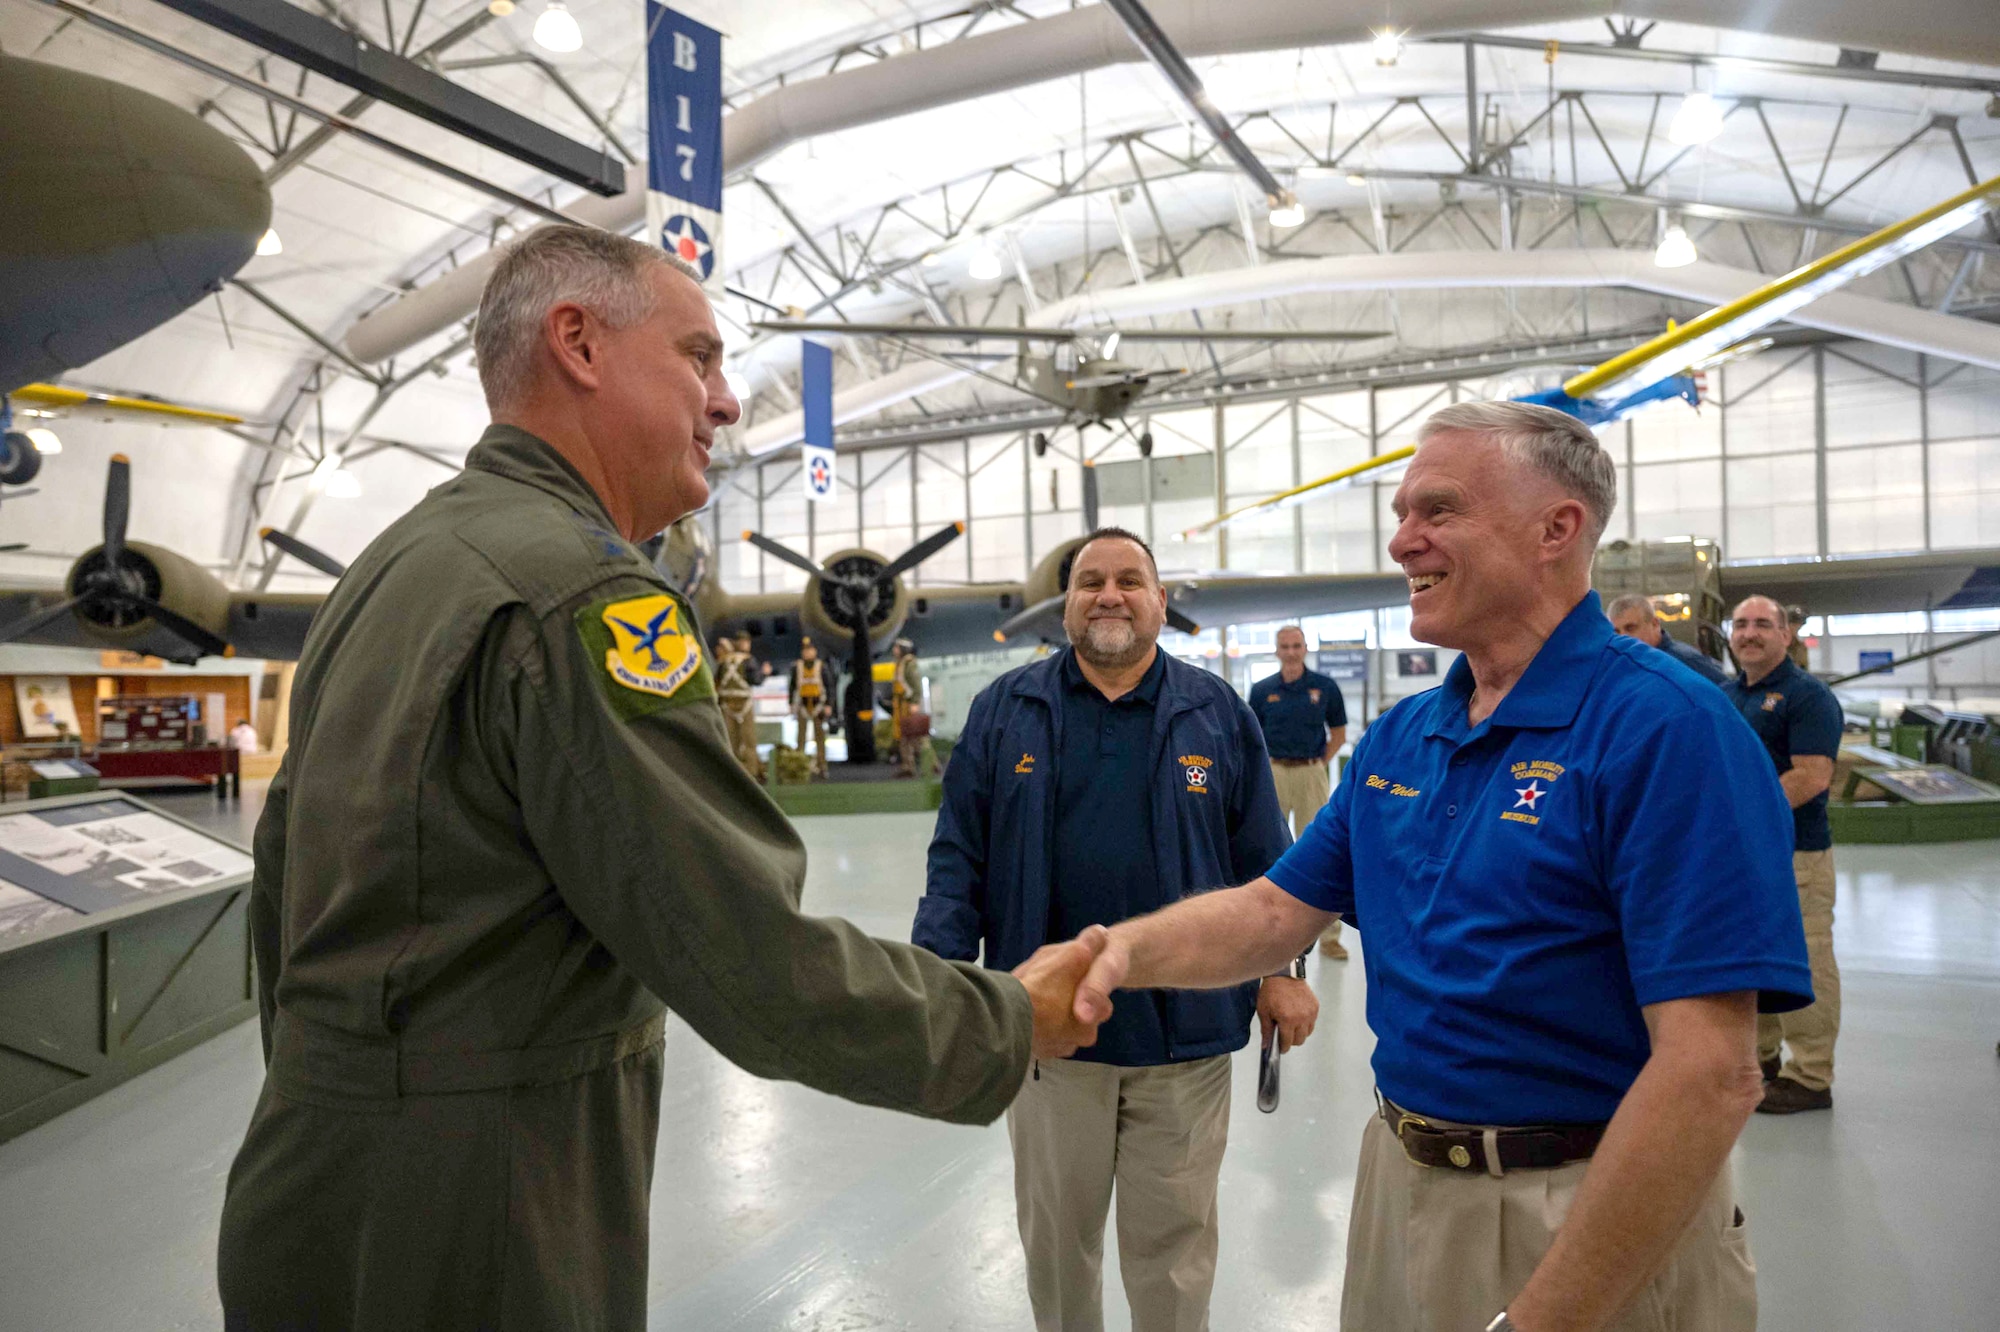 Gen. Mike Minihan, left, Air Mobility Command commander, greets an AMC Museum volunteer at Dover Air Force Base, Delaware, May 5, 2022. During his visit, Minihan and Chief Master Sgt. Brian Kruzelnick, AMC command chief, discussed daily operations and the future expansion projects at the museum. (U.S. Air Force photo by Senior Airman Faith Schaefer)